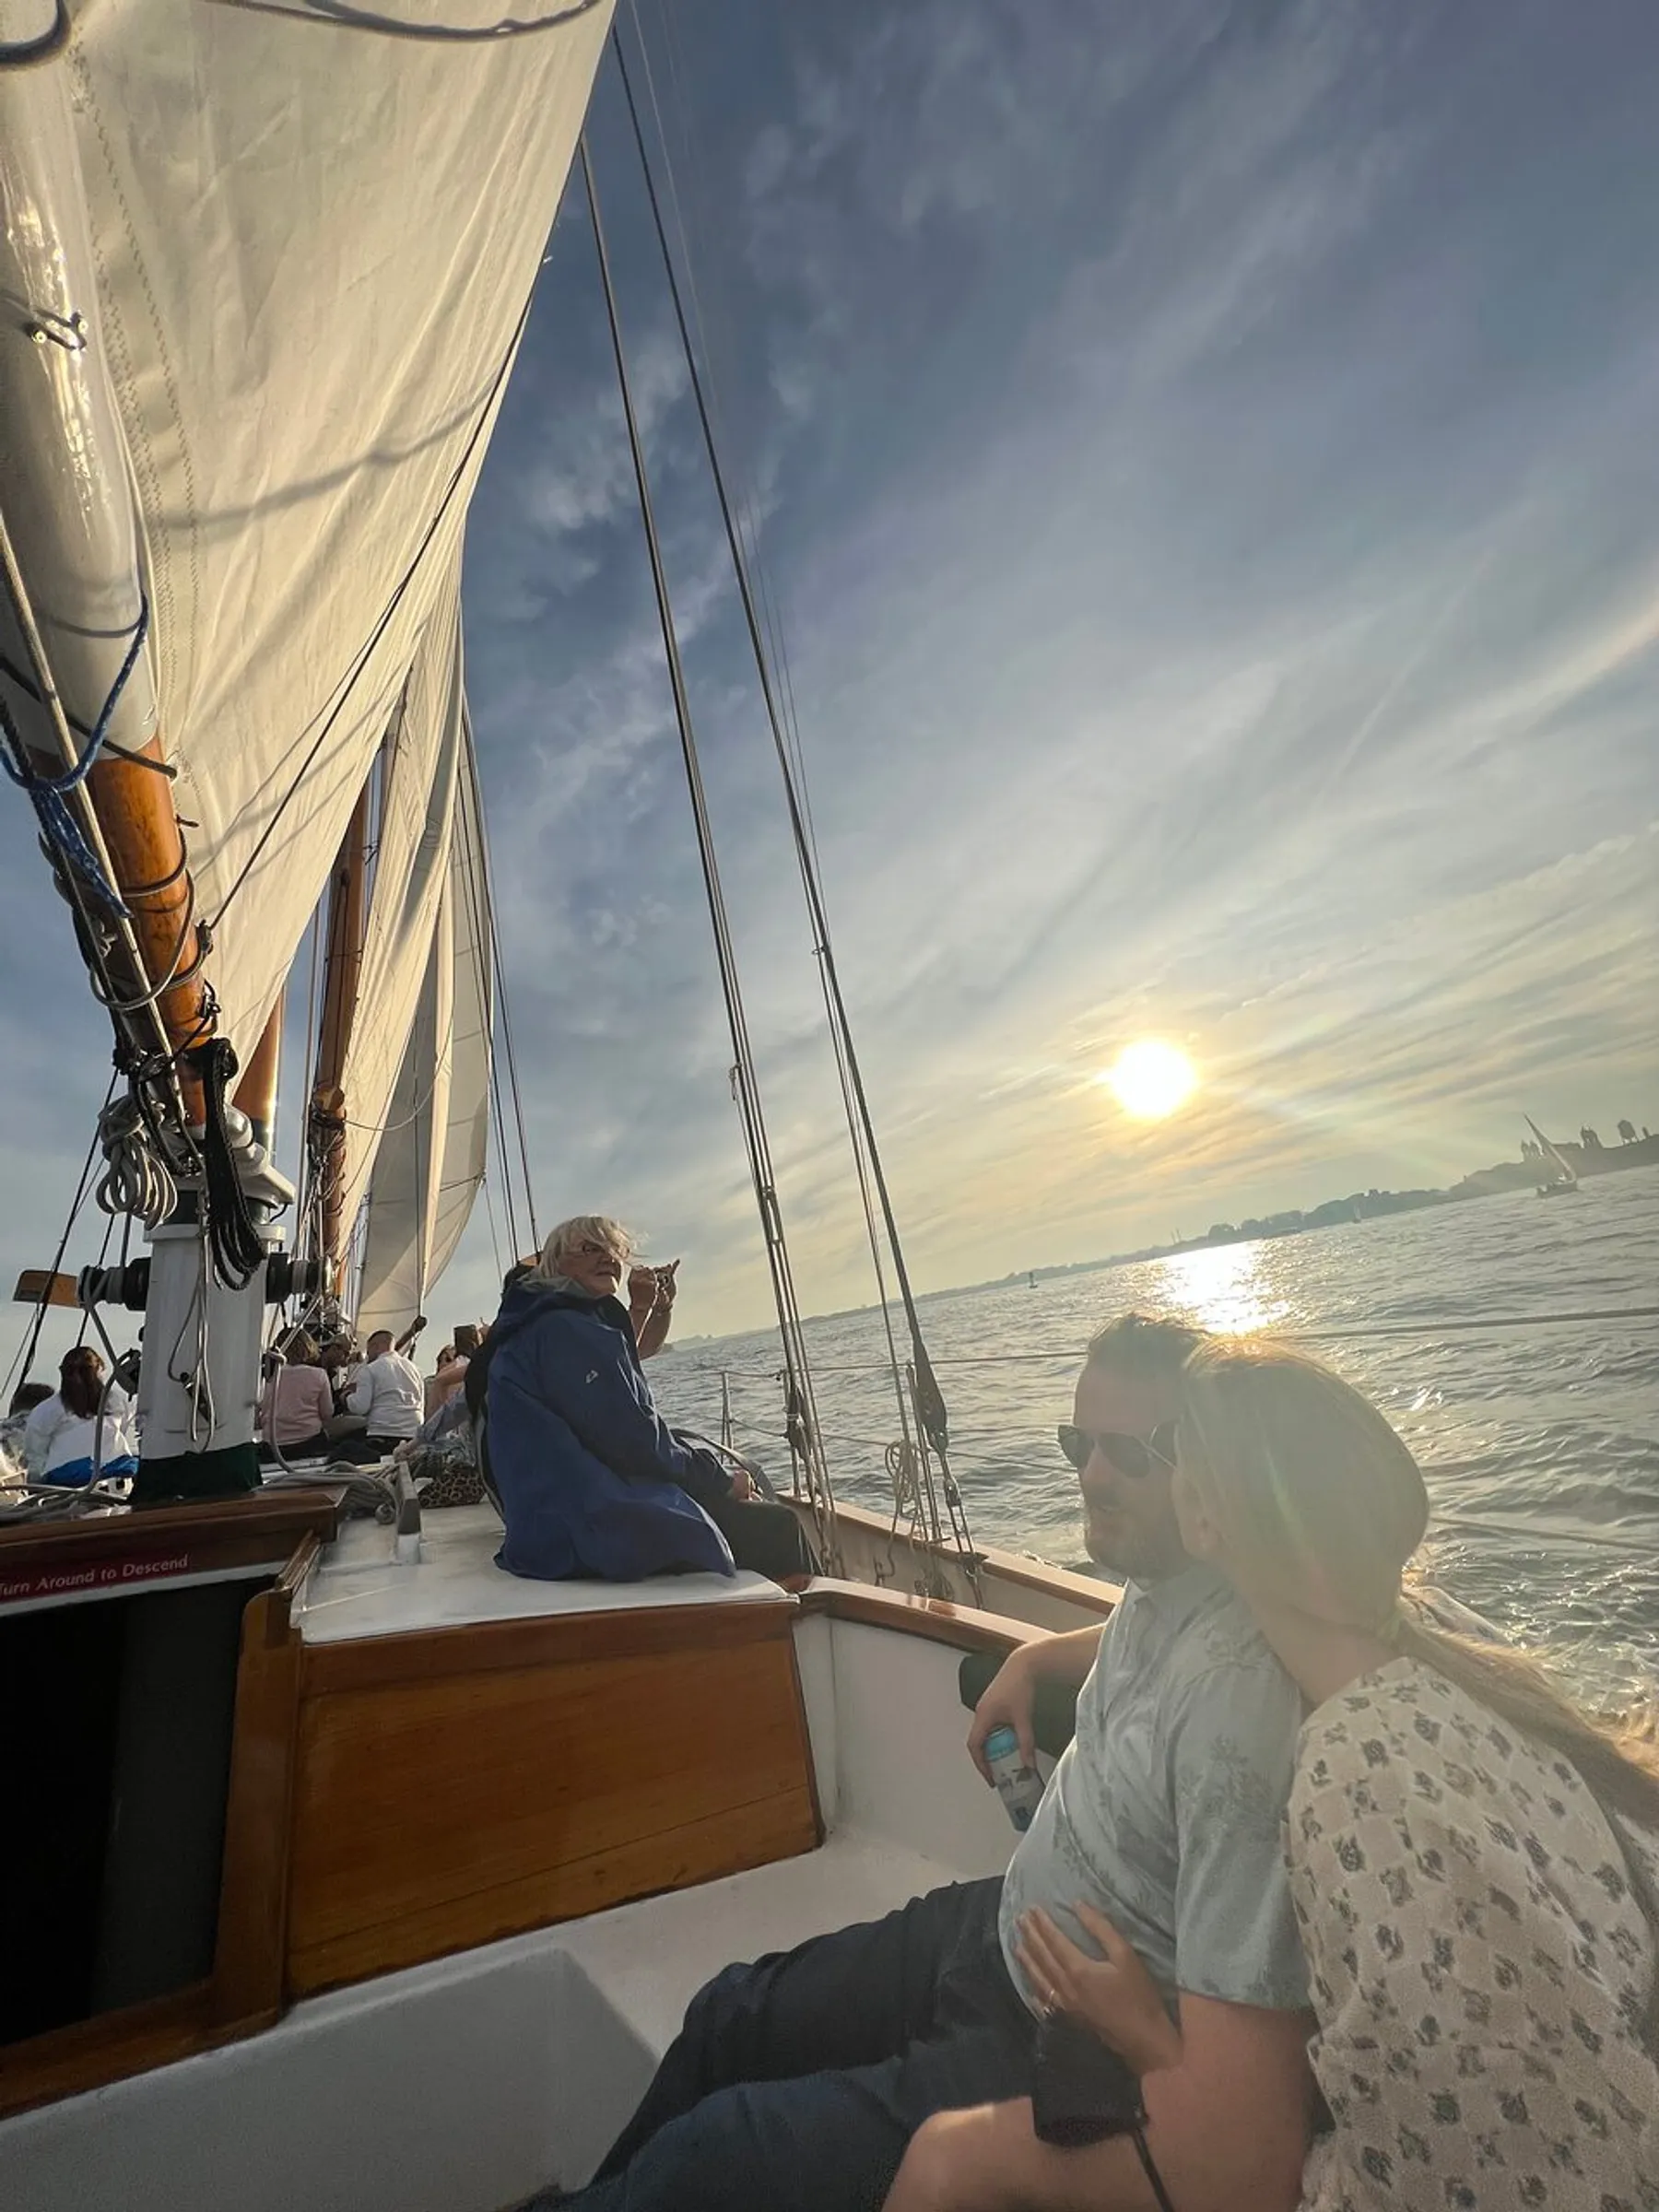 People are enjoying a serene sailboat ride at sunset, with the sails hoisted against the backdrop of a calm sea and the setting sun.